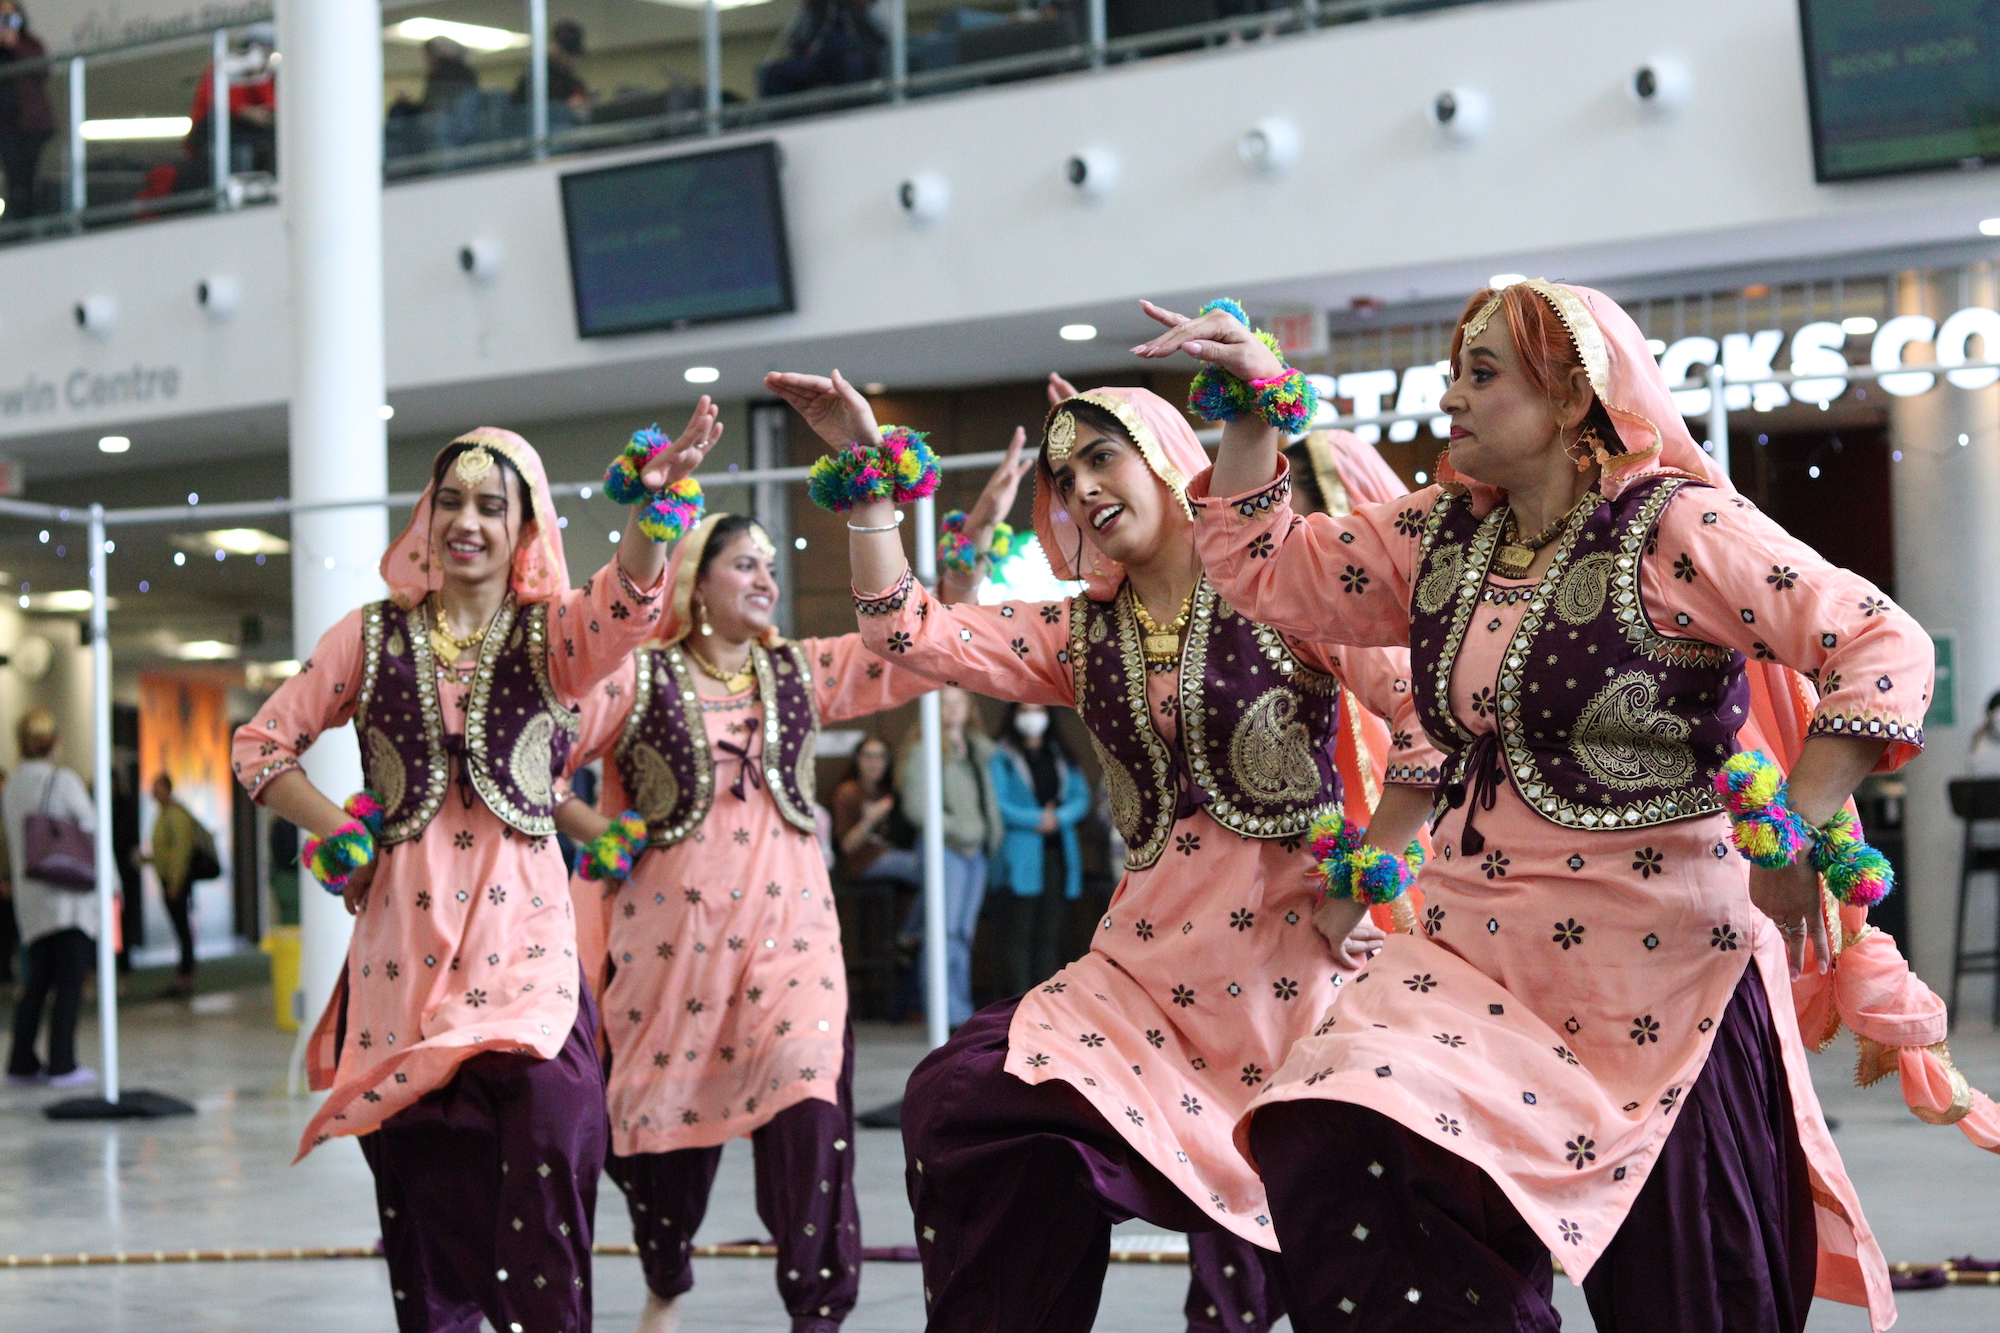 Bhangra originated in the Northern state of Punjab in India, and is traditionally performed in a circle by farmers during the harvest season. It is a popular dance form in India and will regularly be performed at parties and celebrations.